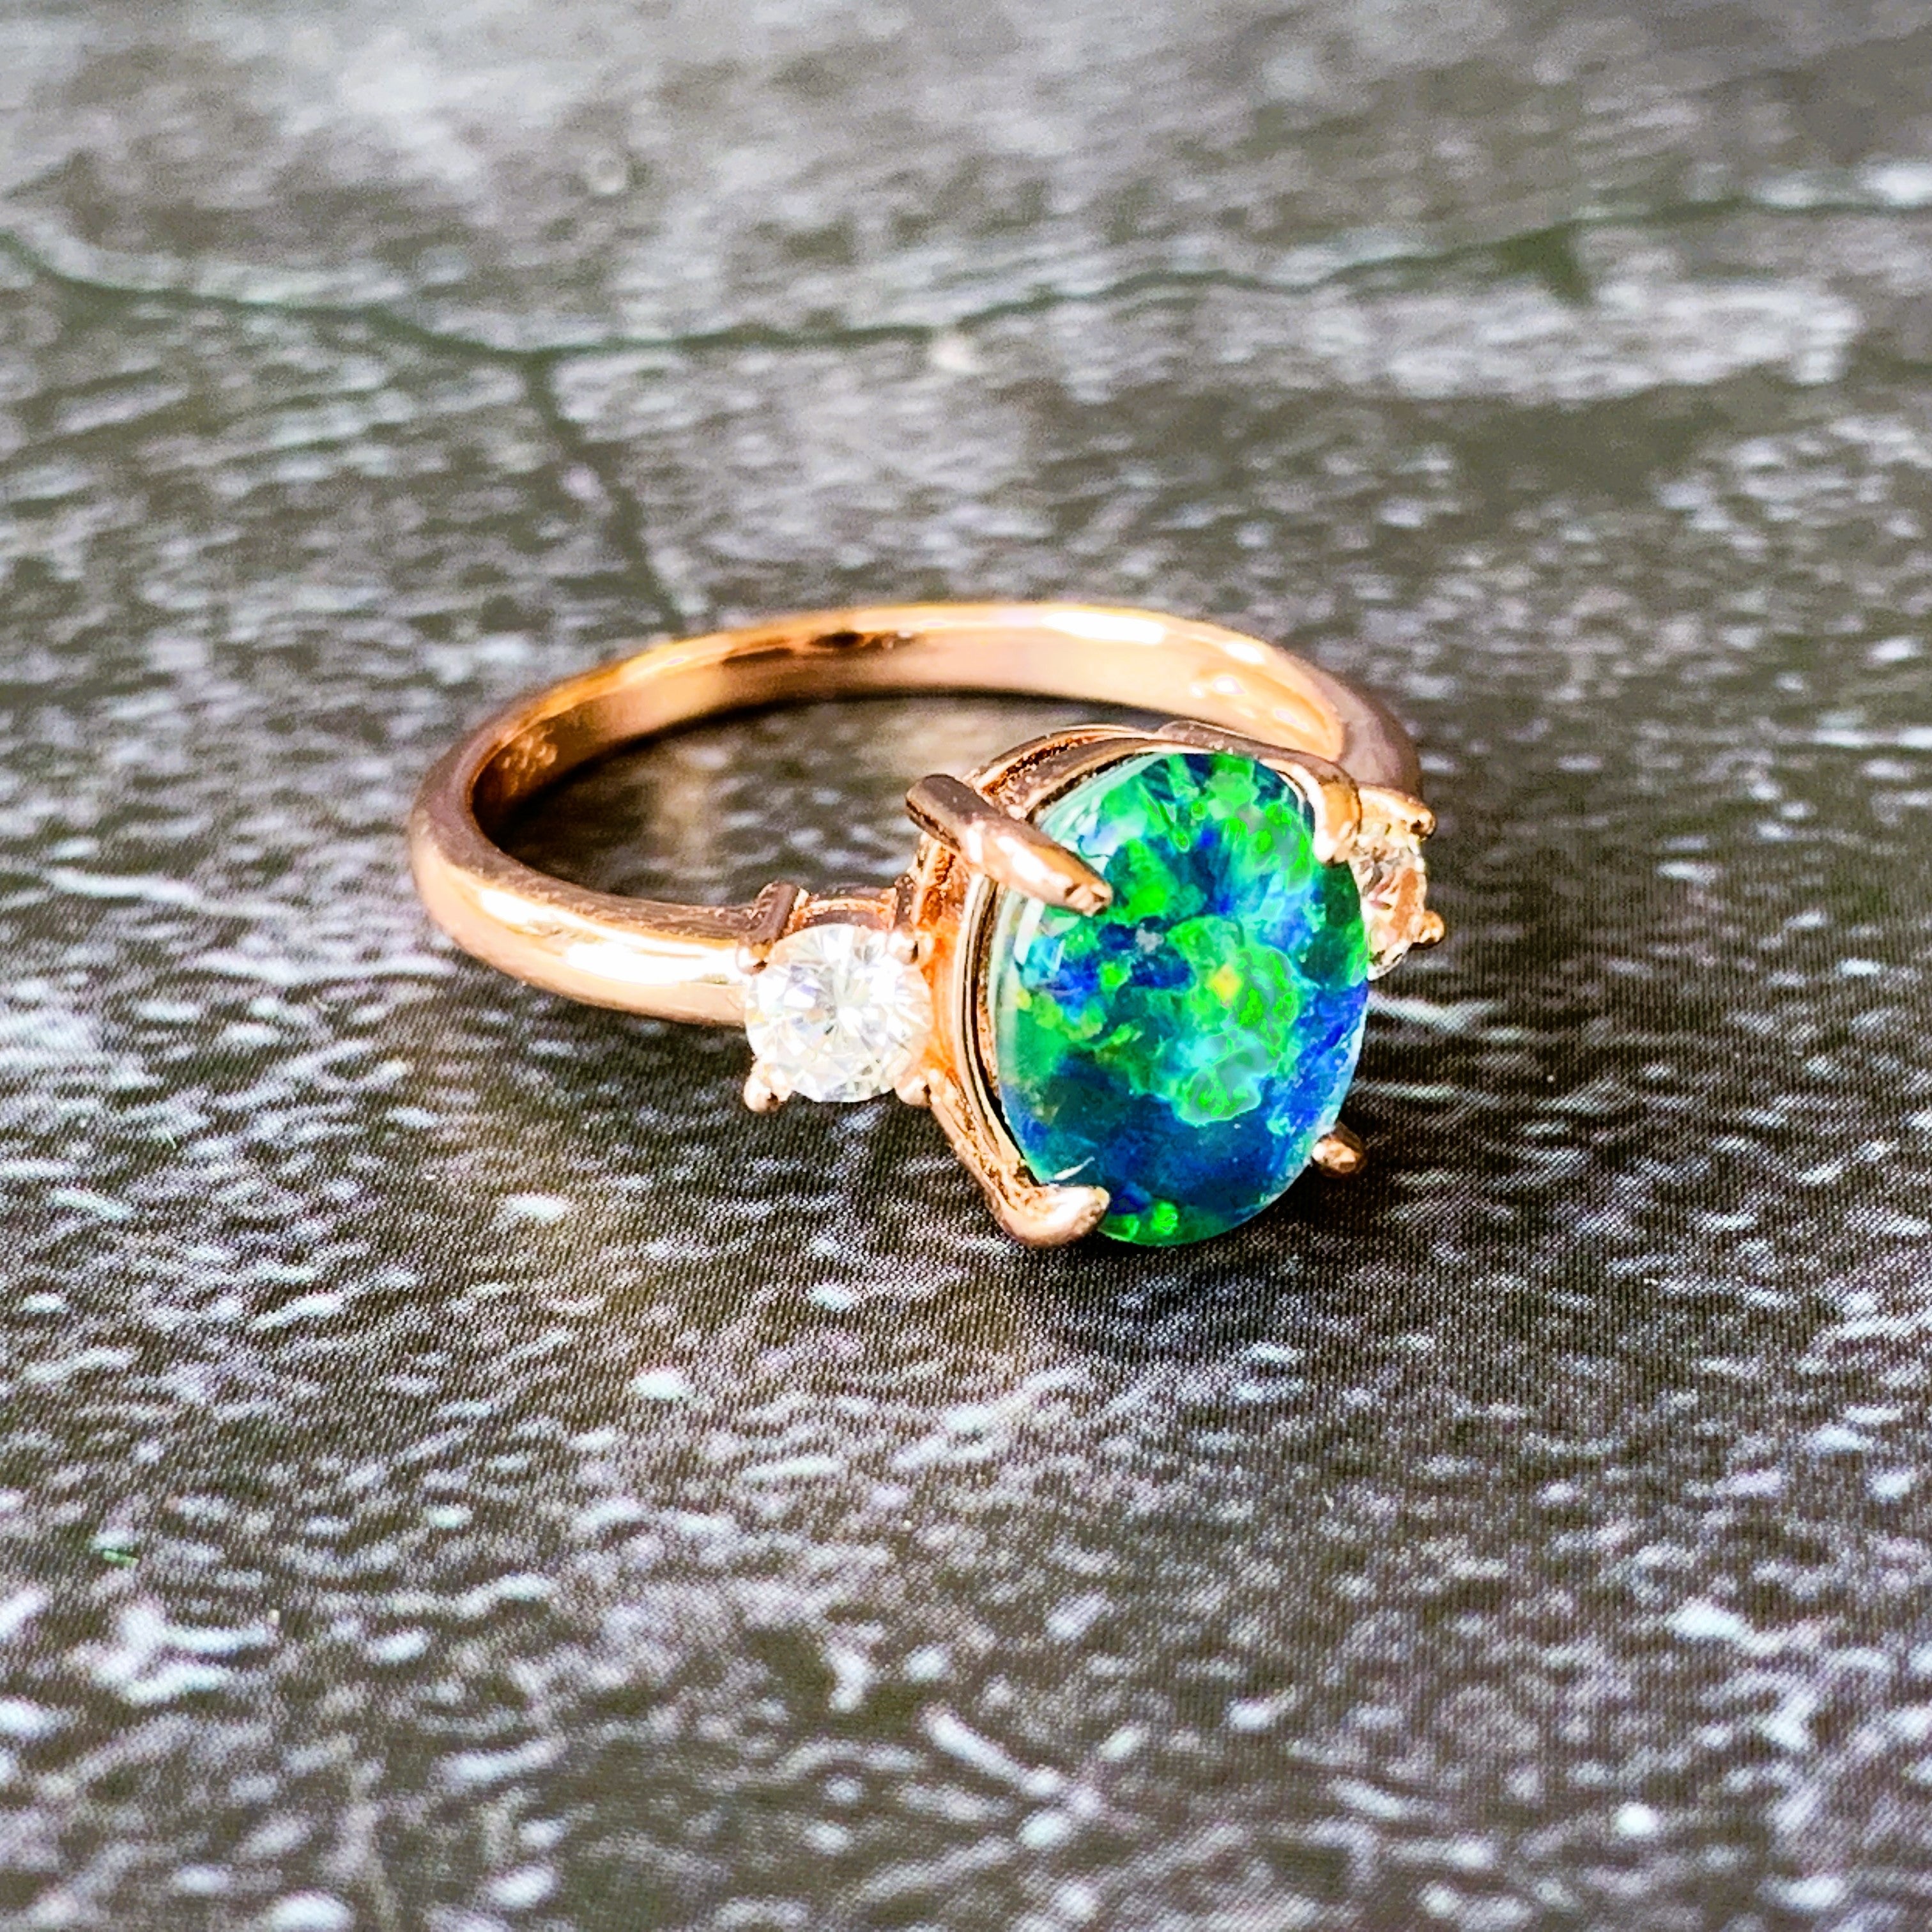 Rose Gold plated silver ring 9x7mm Opal 3 stone ring - Masterpiece Jewellery Opal & Gems Sydney Australia | Online Shop